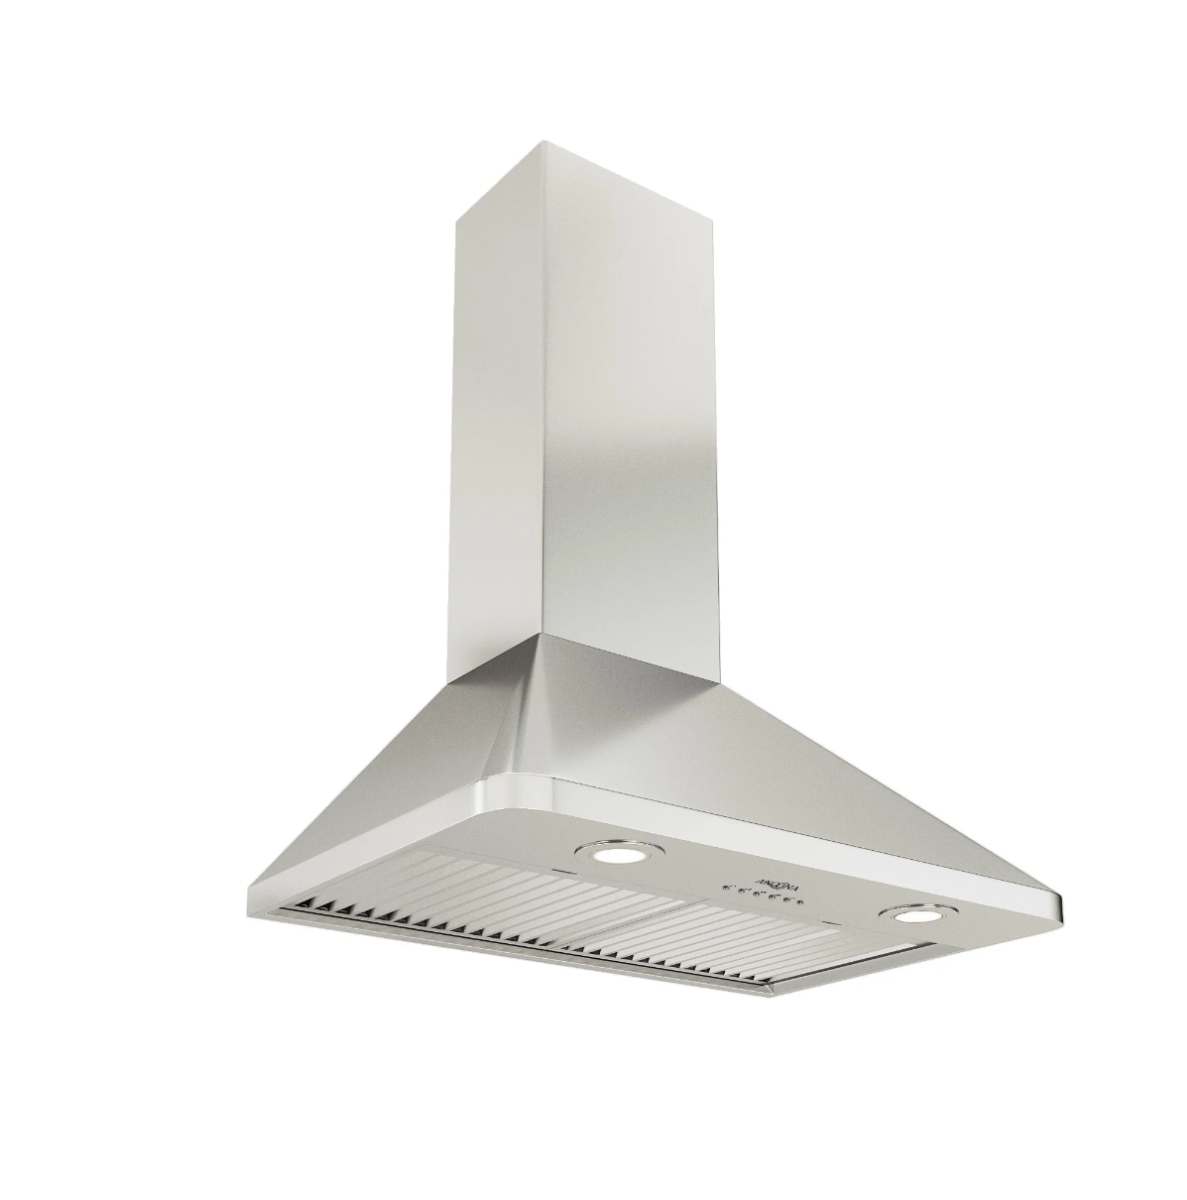 Ancona AN-1196 WPR630 30" 600 CFM Ducted Wall Mount Range Hood in Stainless Steel